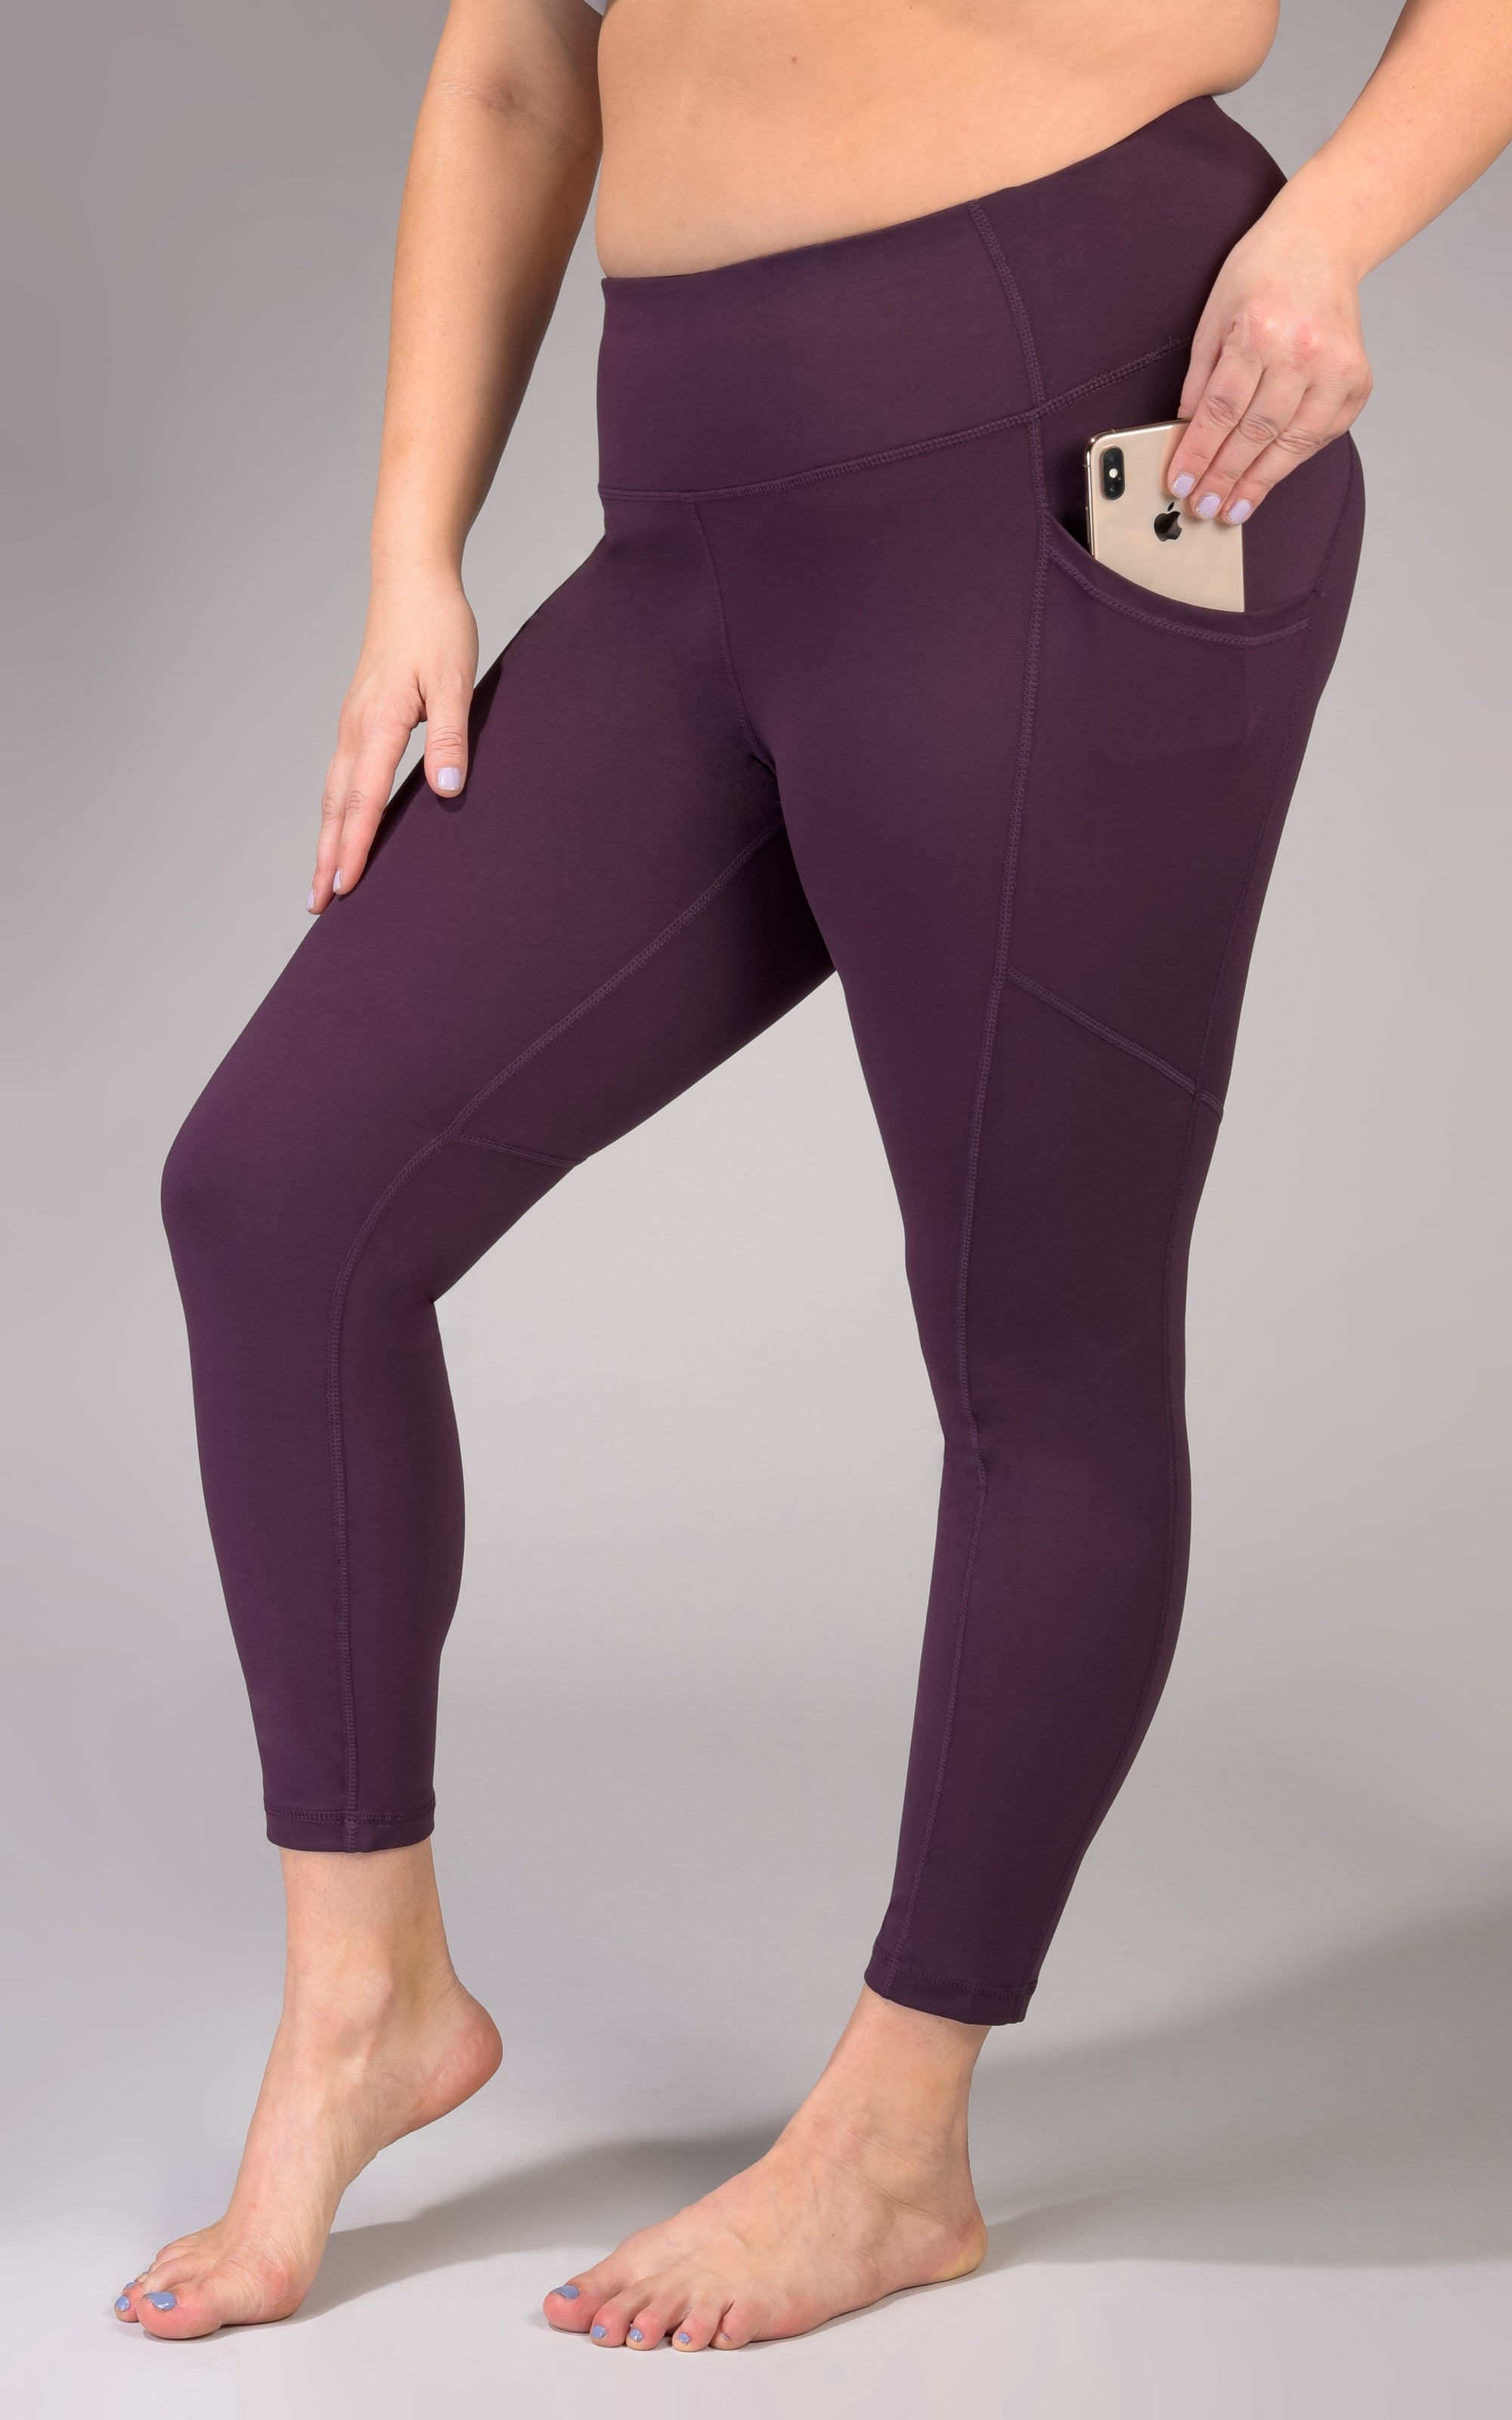 Yogalicious Lux 3X Women's Capris - Pioneer Recycling Services